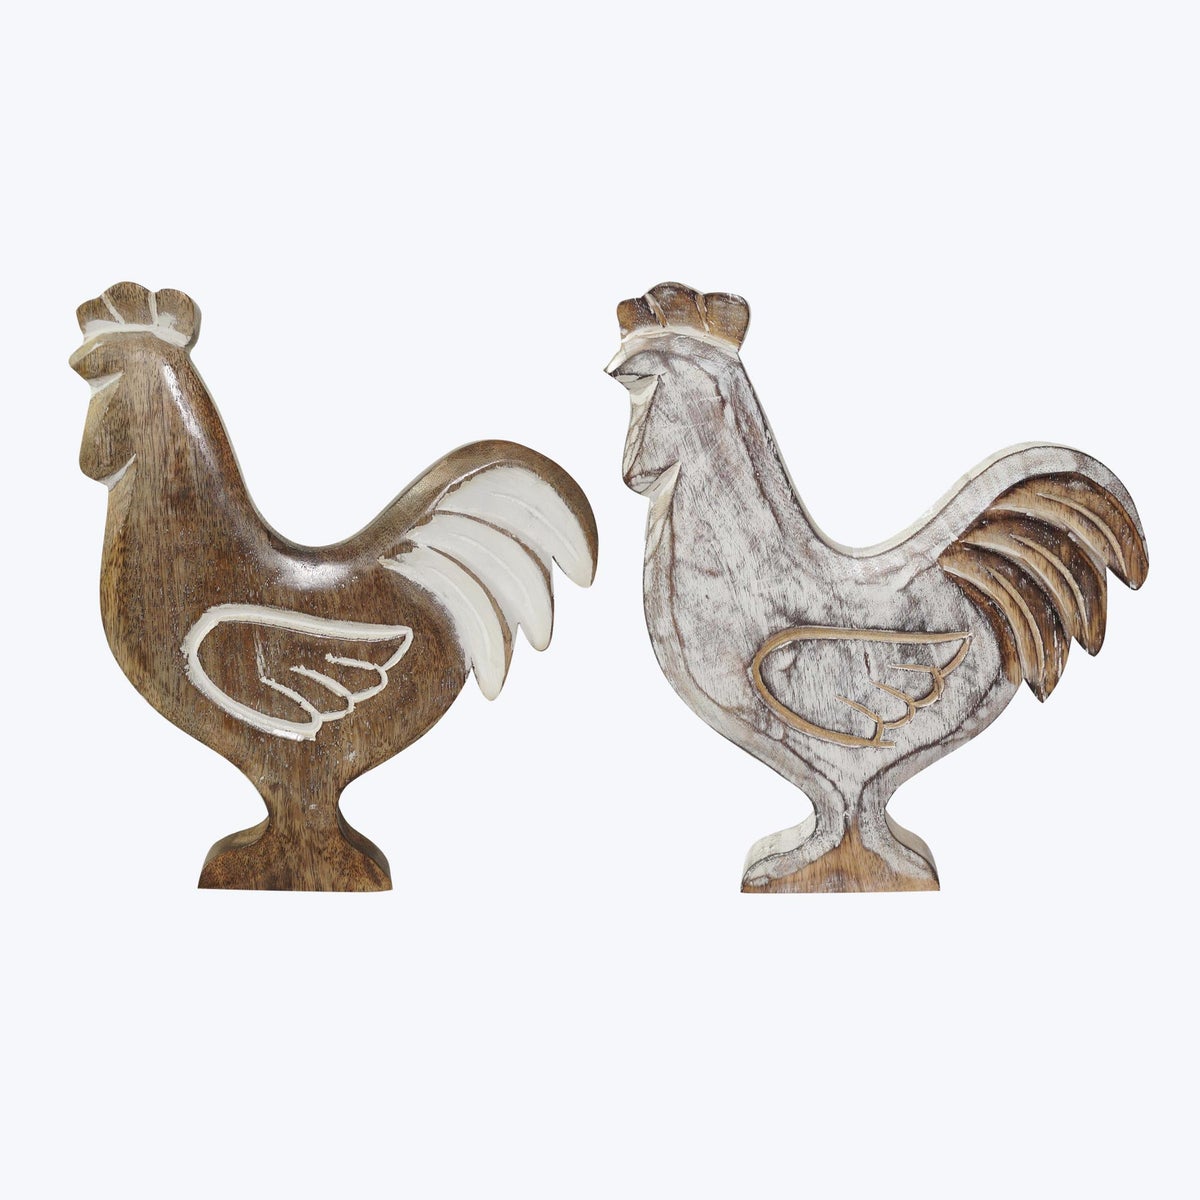 Mango Wood Carved Rooster, 2 Ast